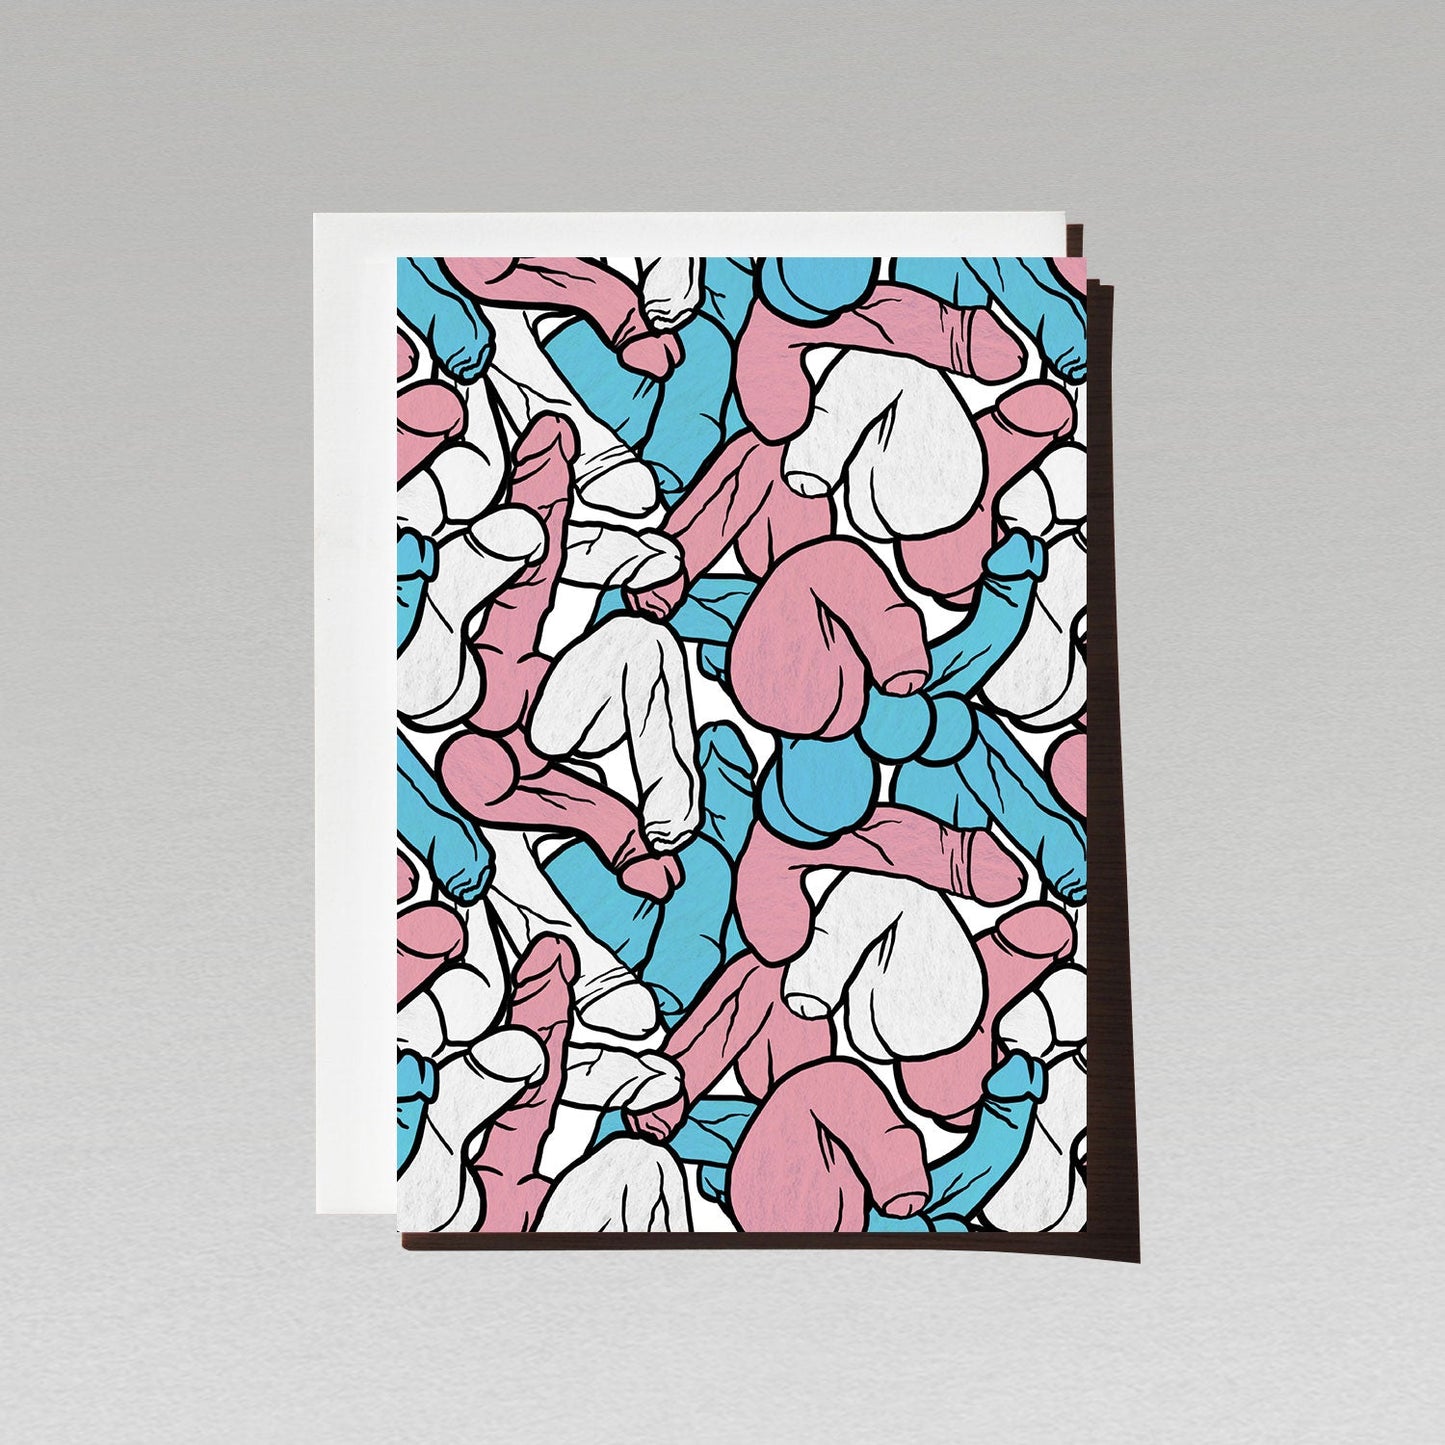 Greeting Card with LGBTQI transgender flag coloured pattern made of all different illustrated penis shapes and sizes